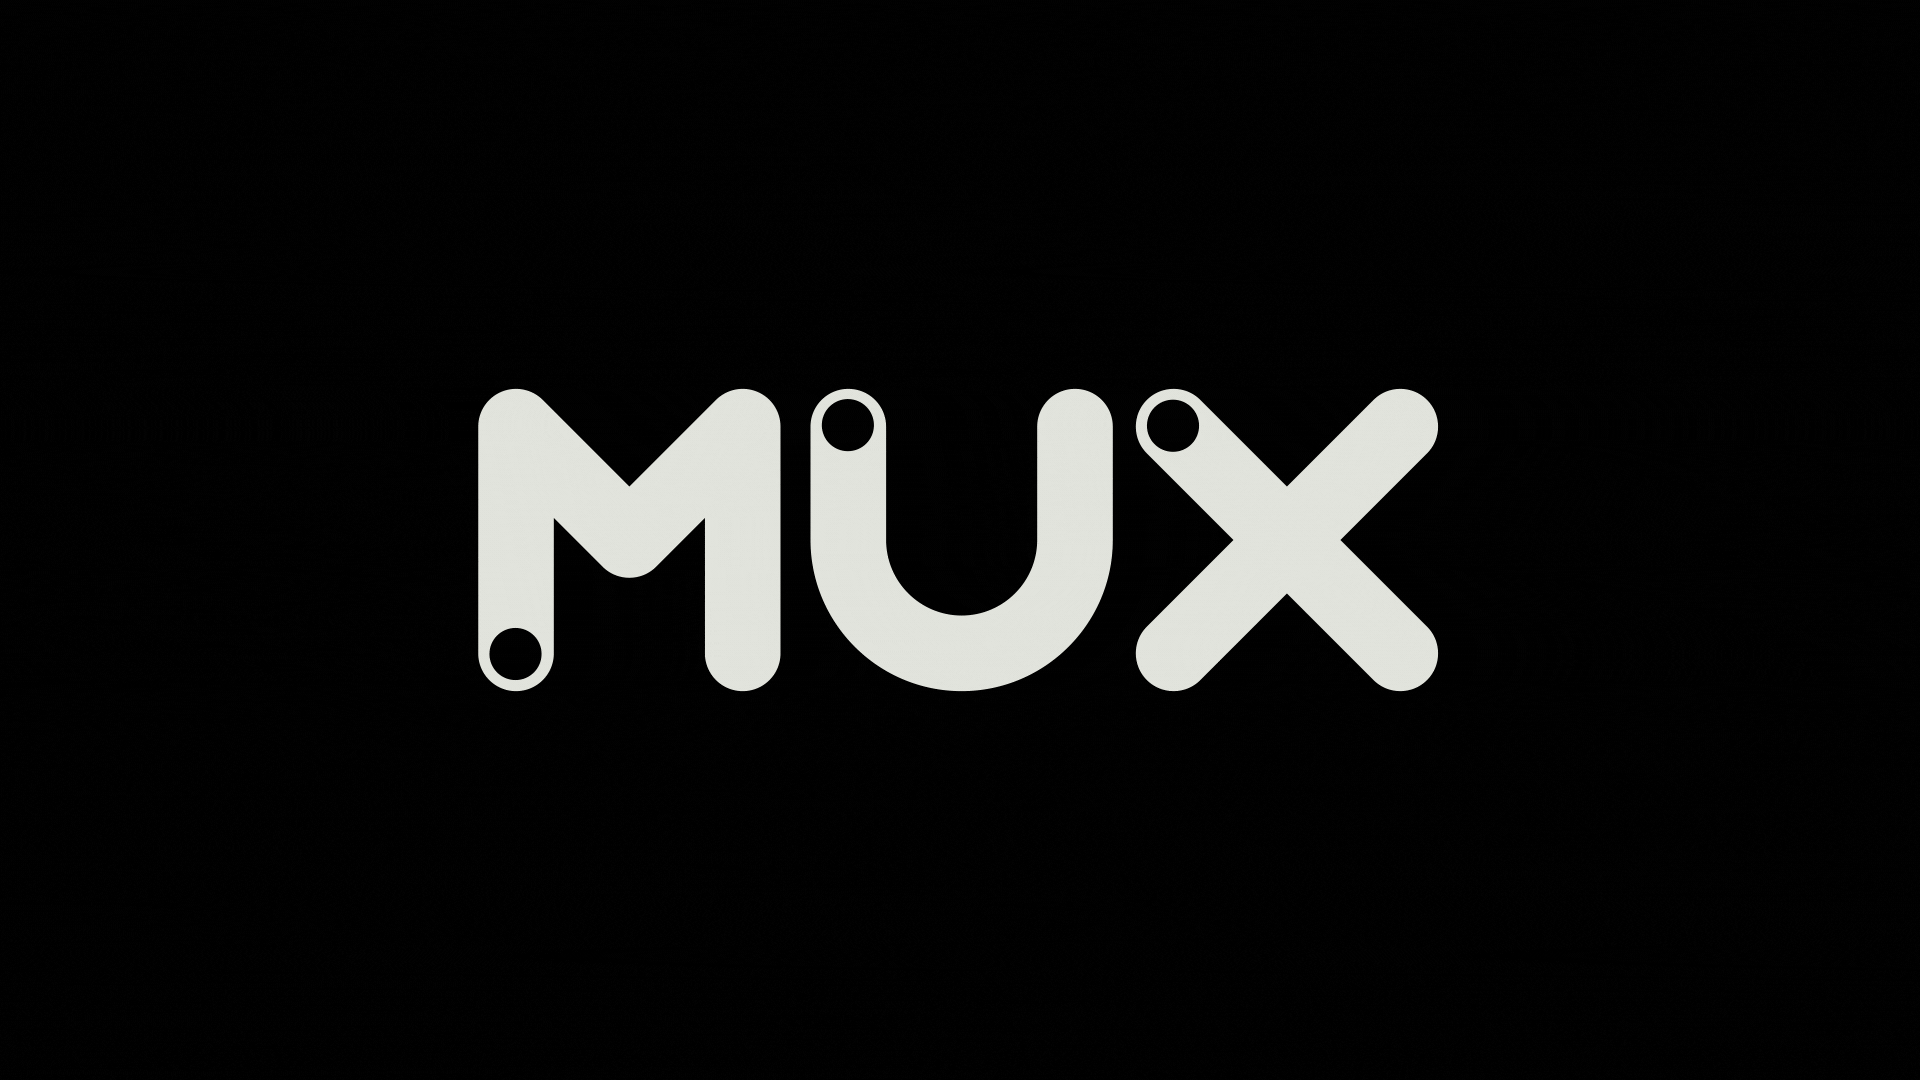 An animation showing three dots, one in each letter of the Mux logo, sliding along the fill of the letter, as if to demonstrate switching a toggle on and off.